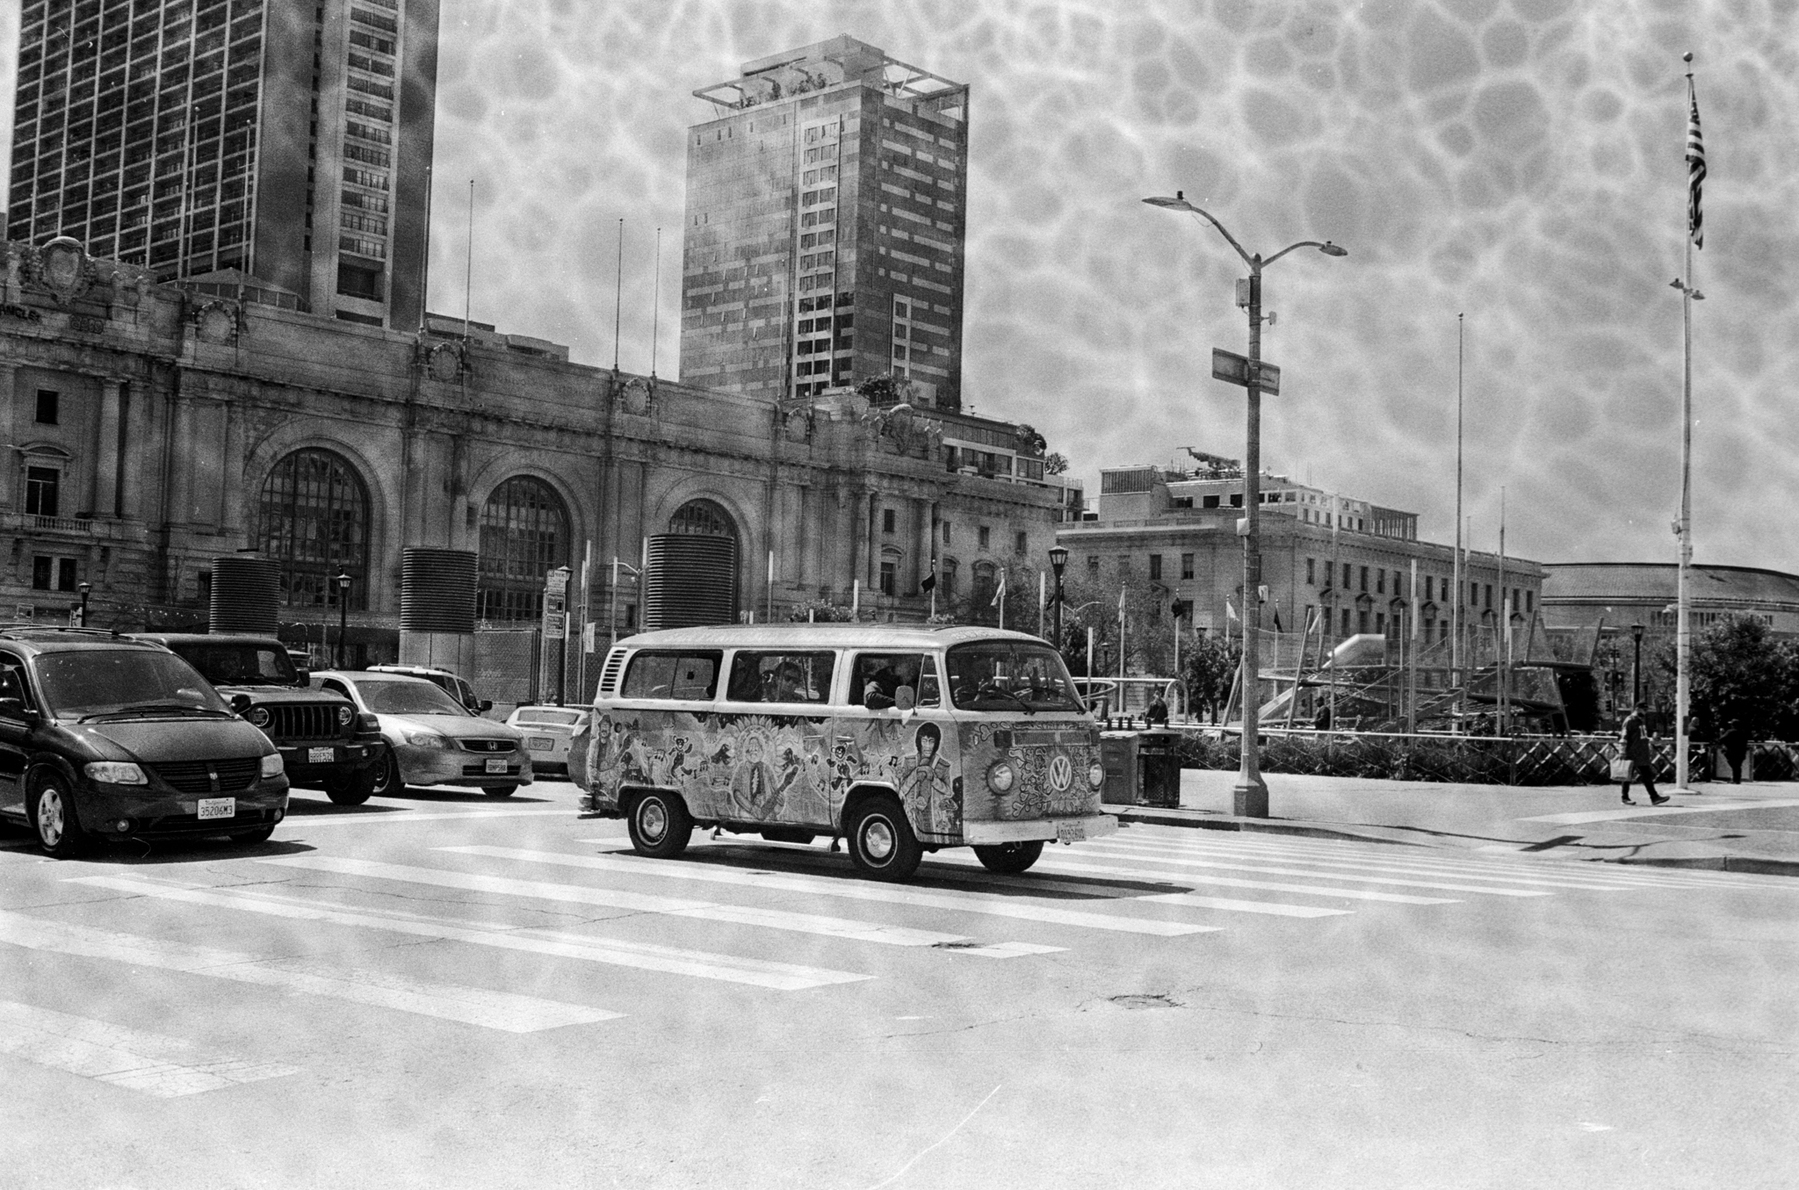 a scan of a black and white photo showing a Volkswagen van carrying tourists on a hippie tour of SF near the Civic Center area